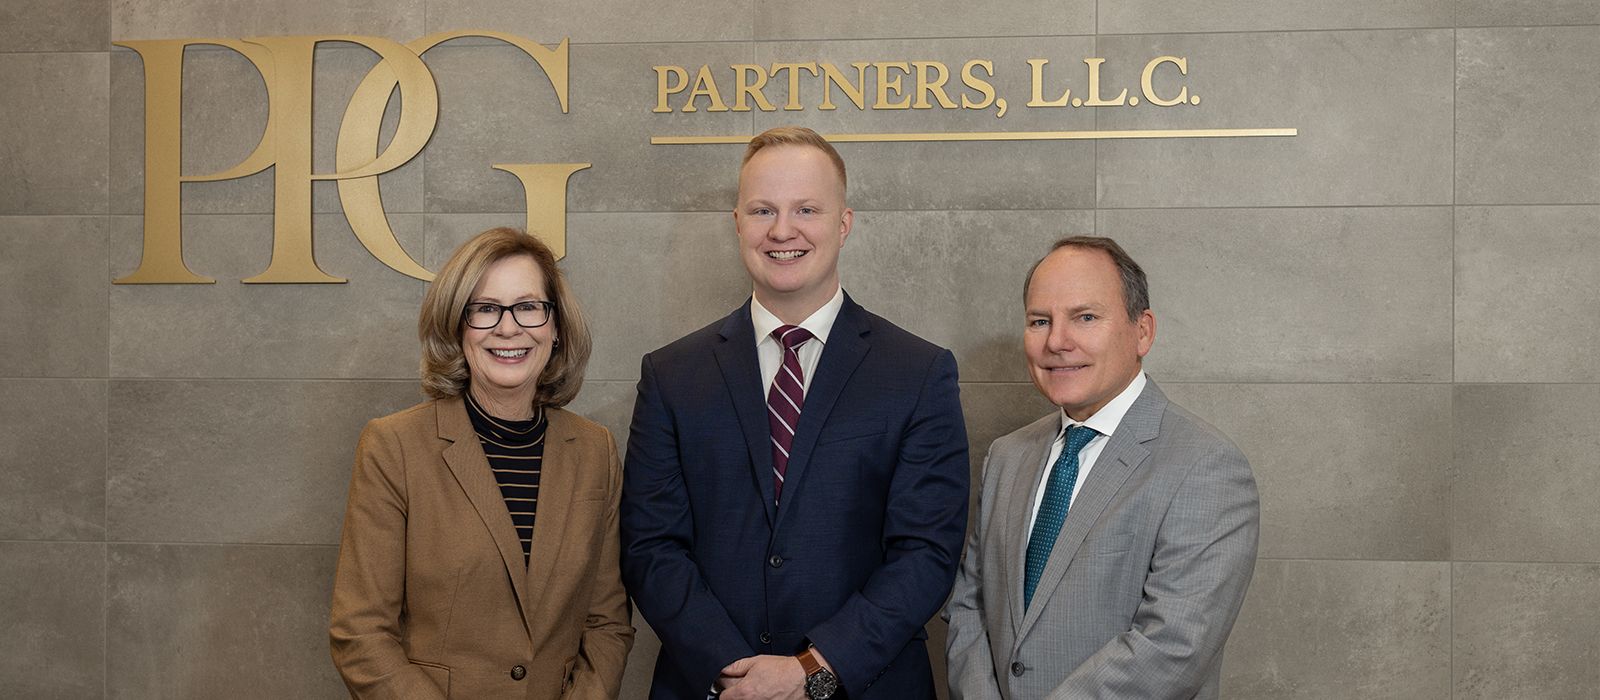 PPG Partners - More Than a Typical CPA Firm